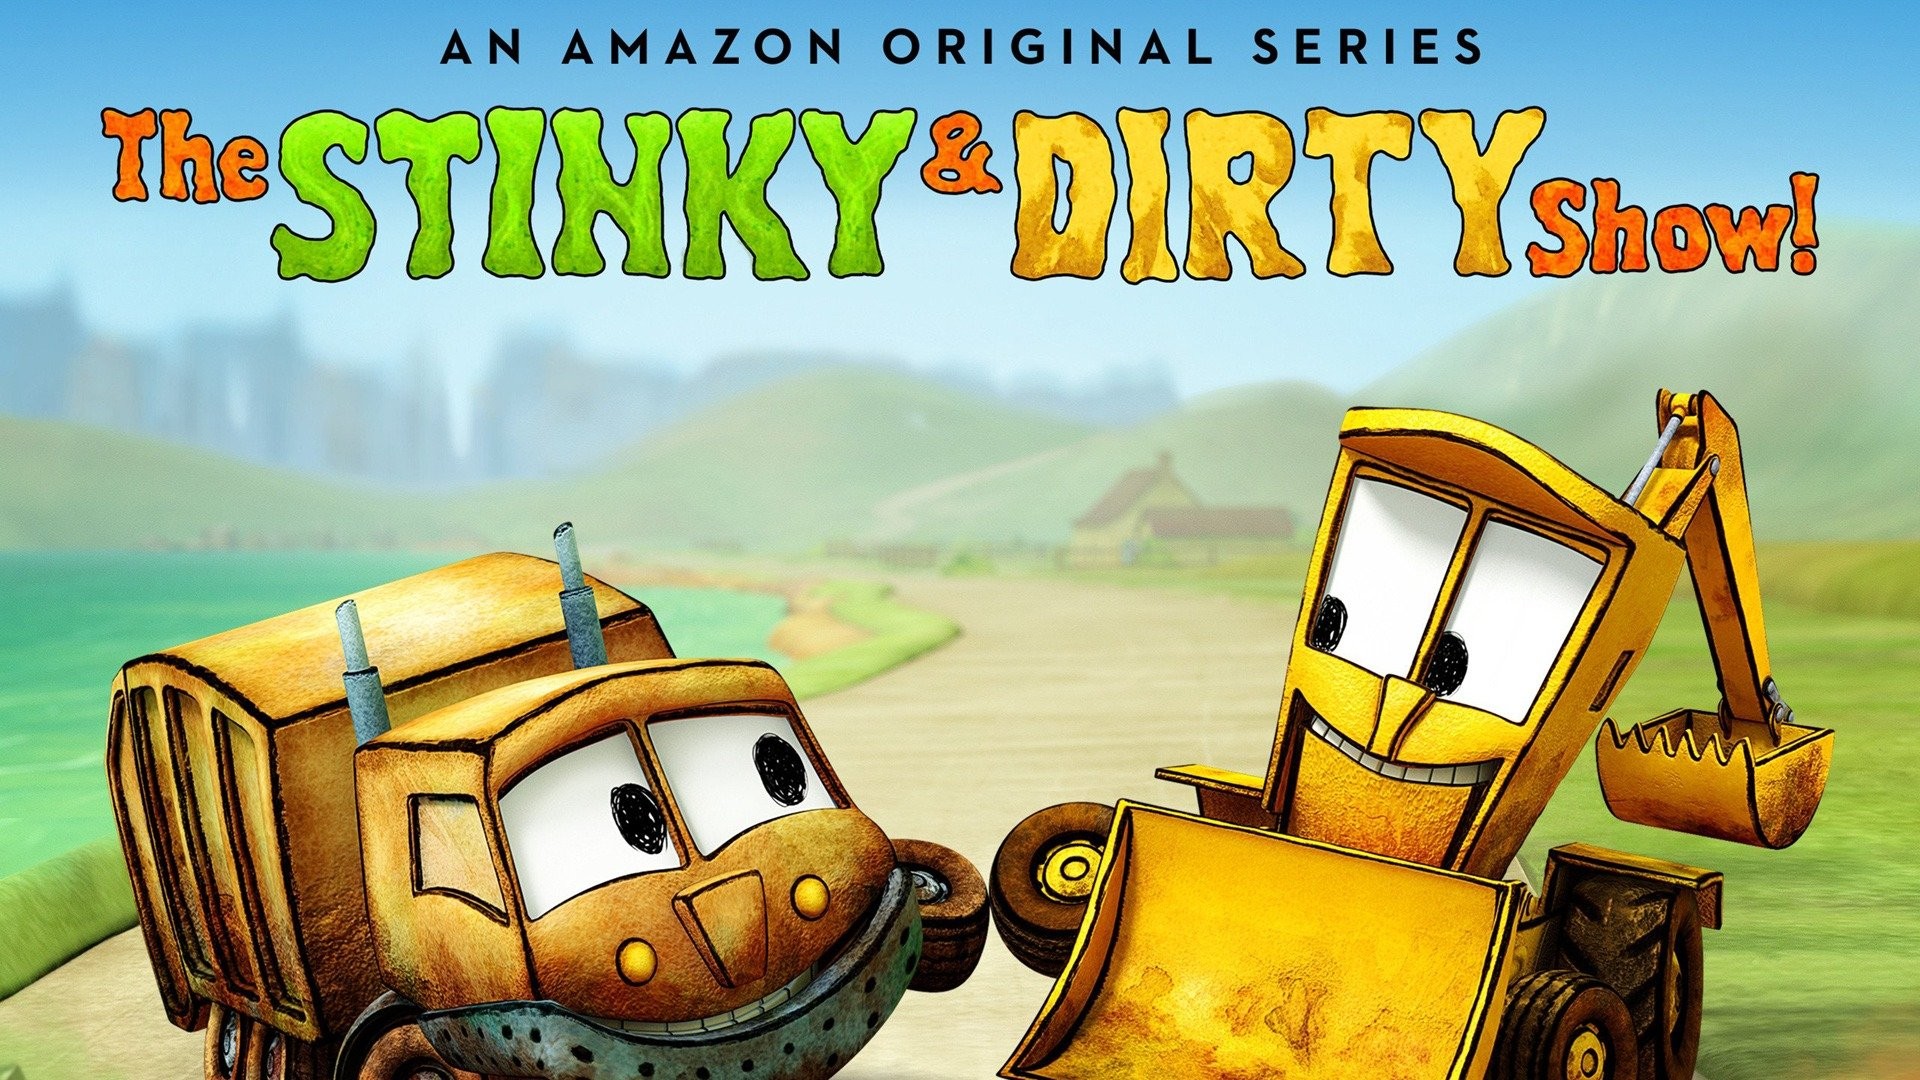 Where to watch The Stinky & Dirty Show